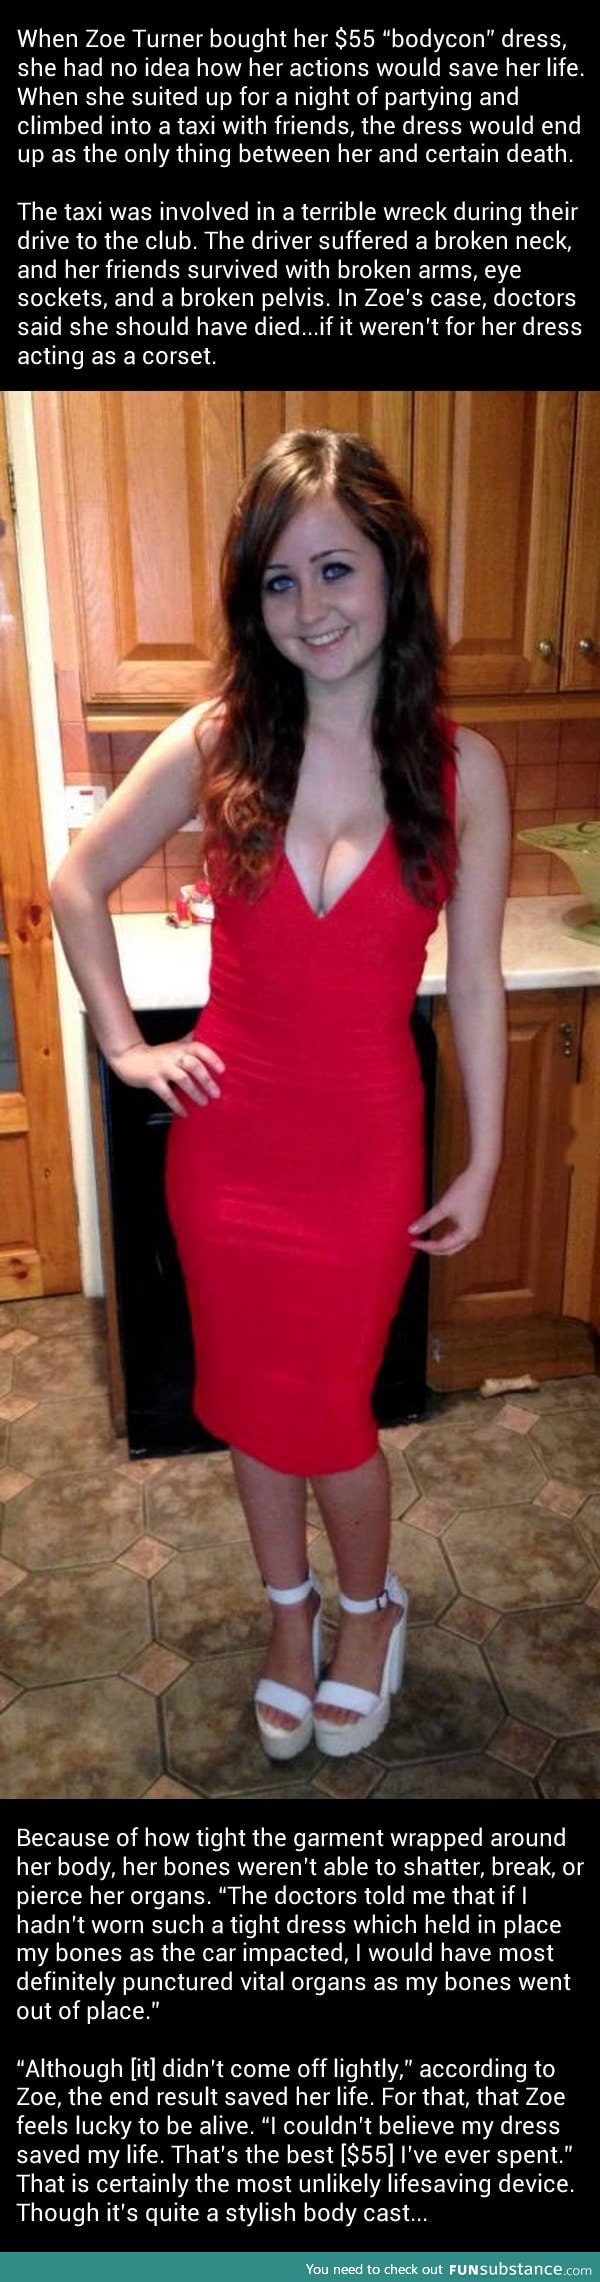 This girl in an incredibly tight dress was saved by something unexpected